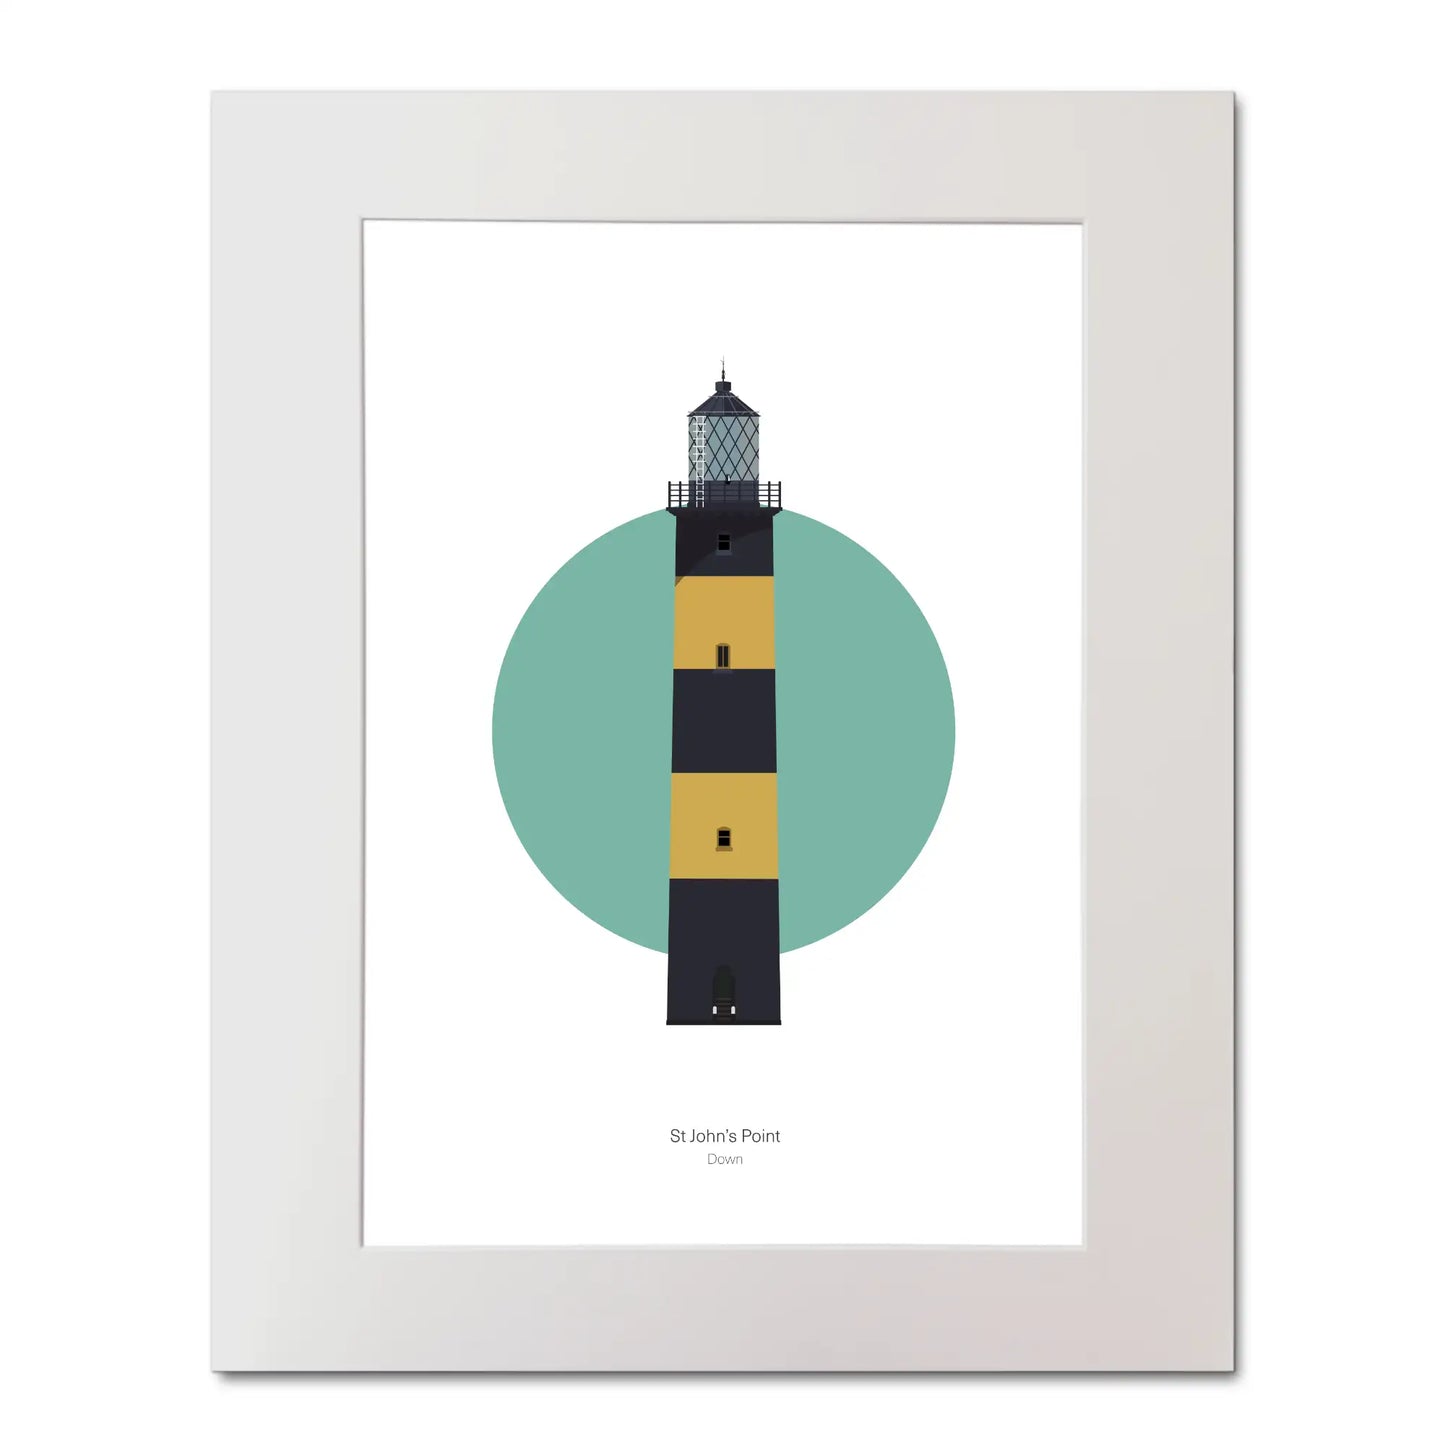 Illustration of St. John's lighthouse on a white background inside light blue square, mounted and measuring 40x50cm.